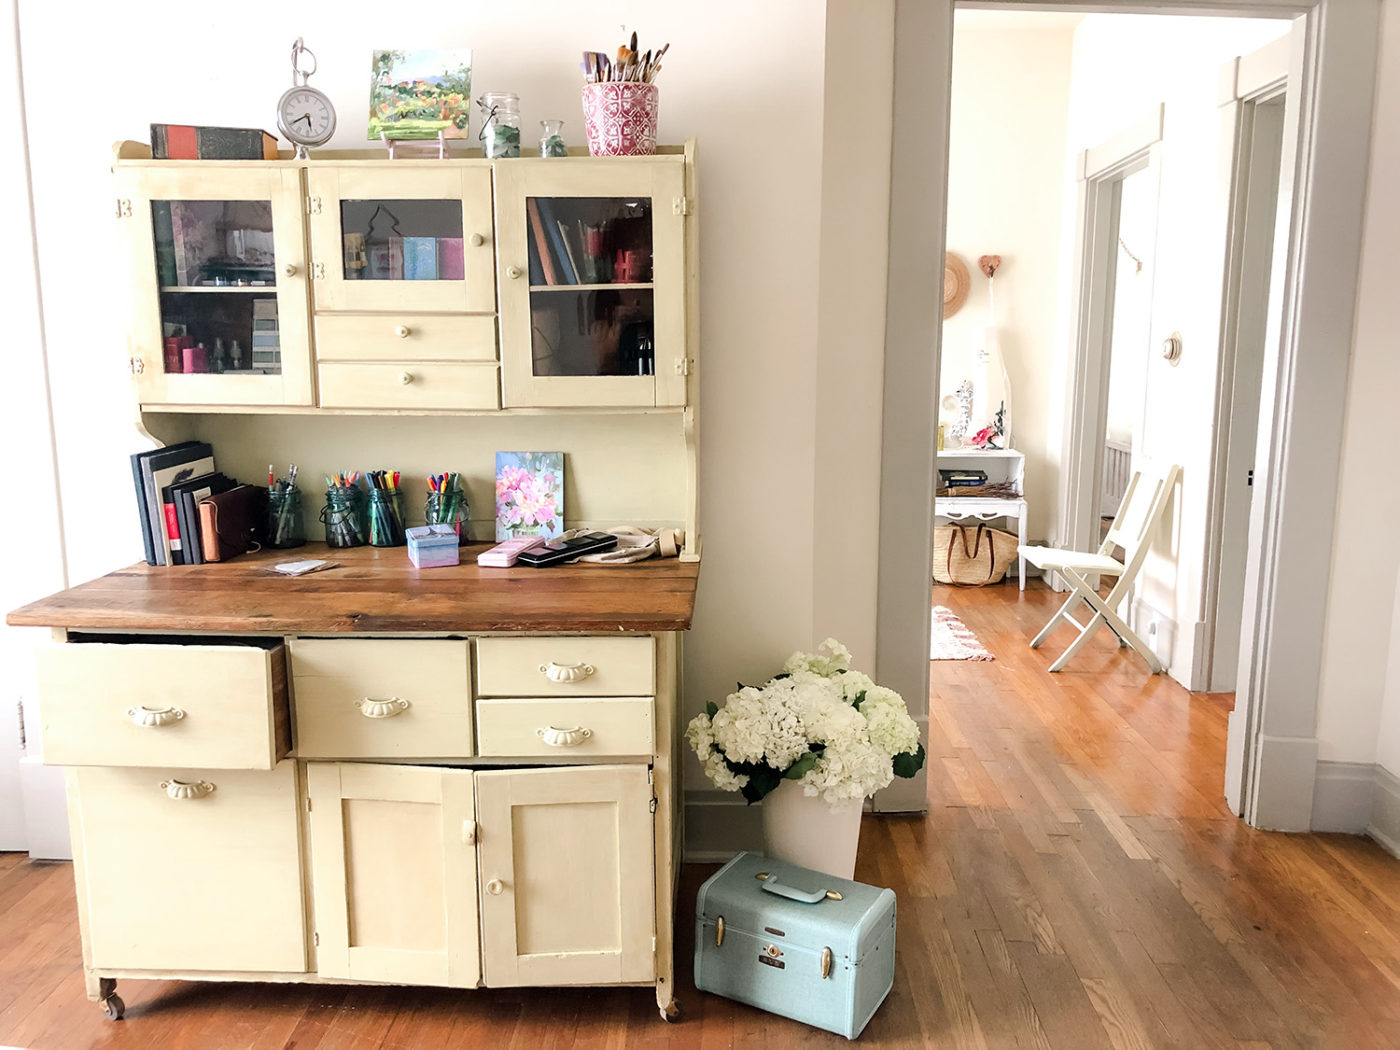 Watercolor Room-Vintage Kitchen Cabinet - Dreama Tolle Perry - https://dreamatolleperry.com